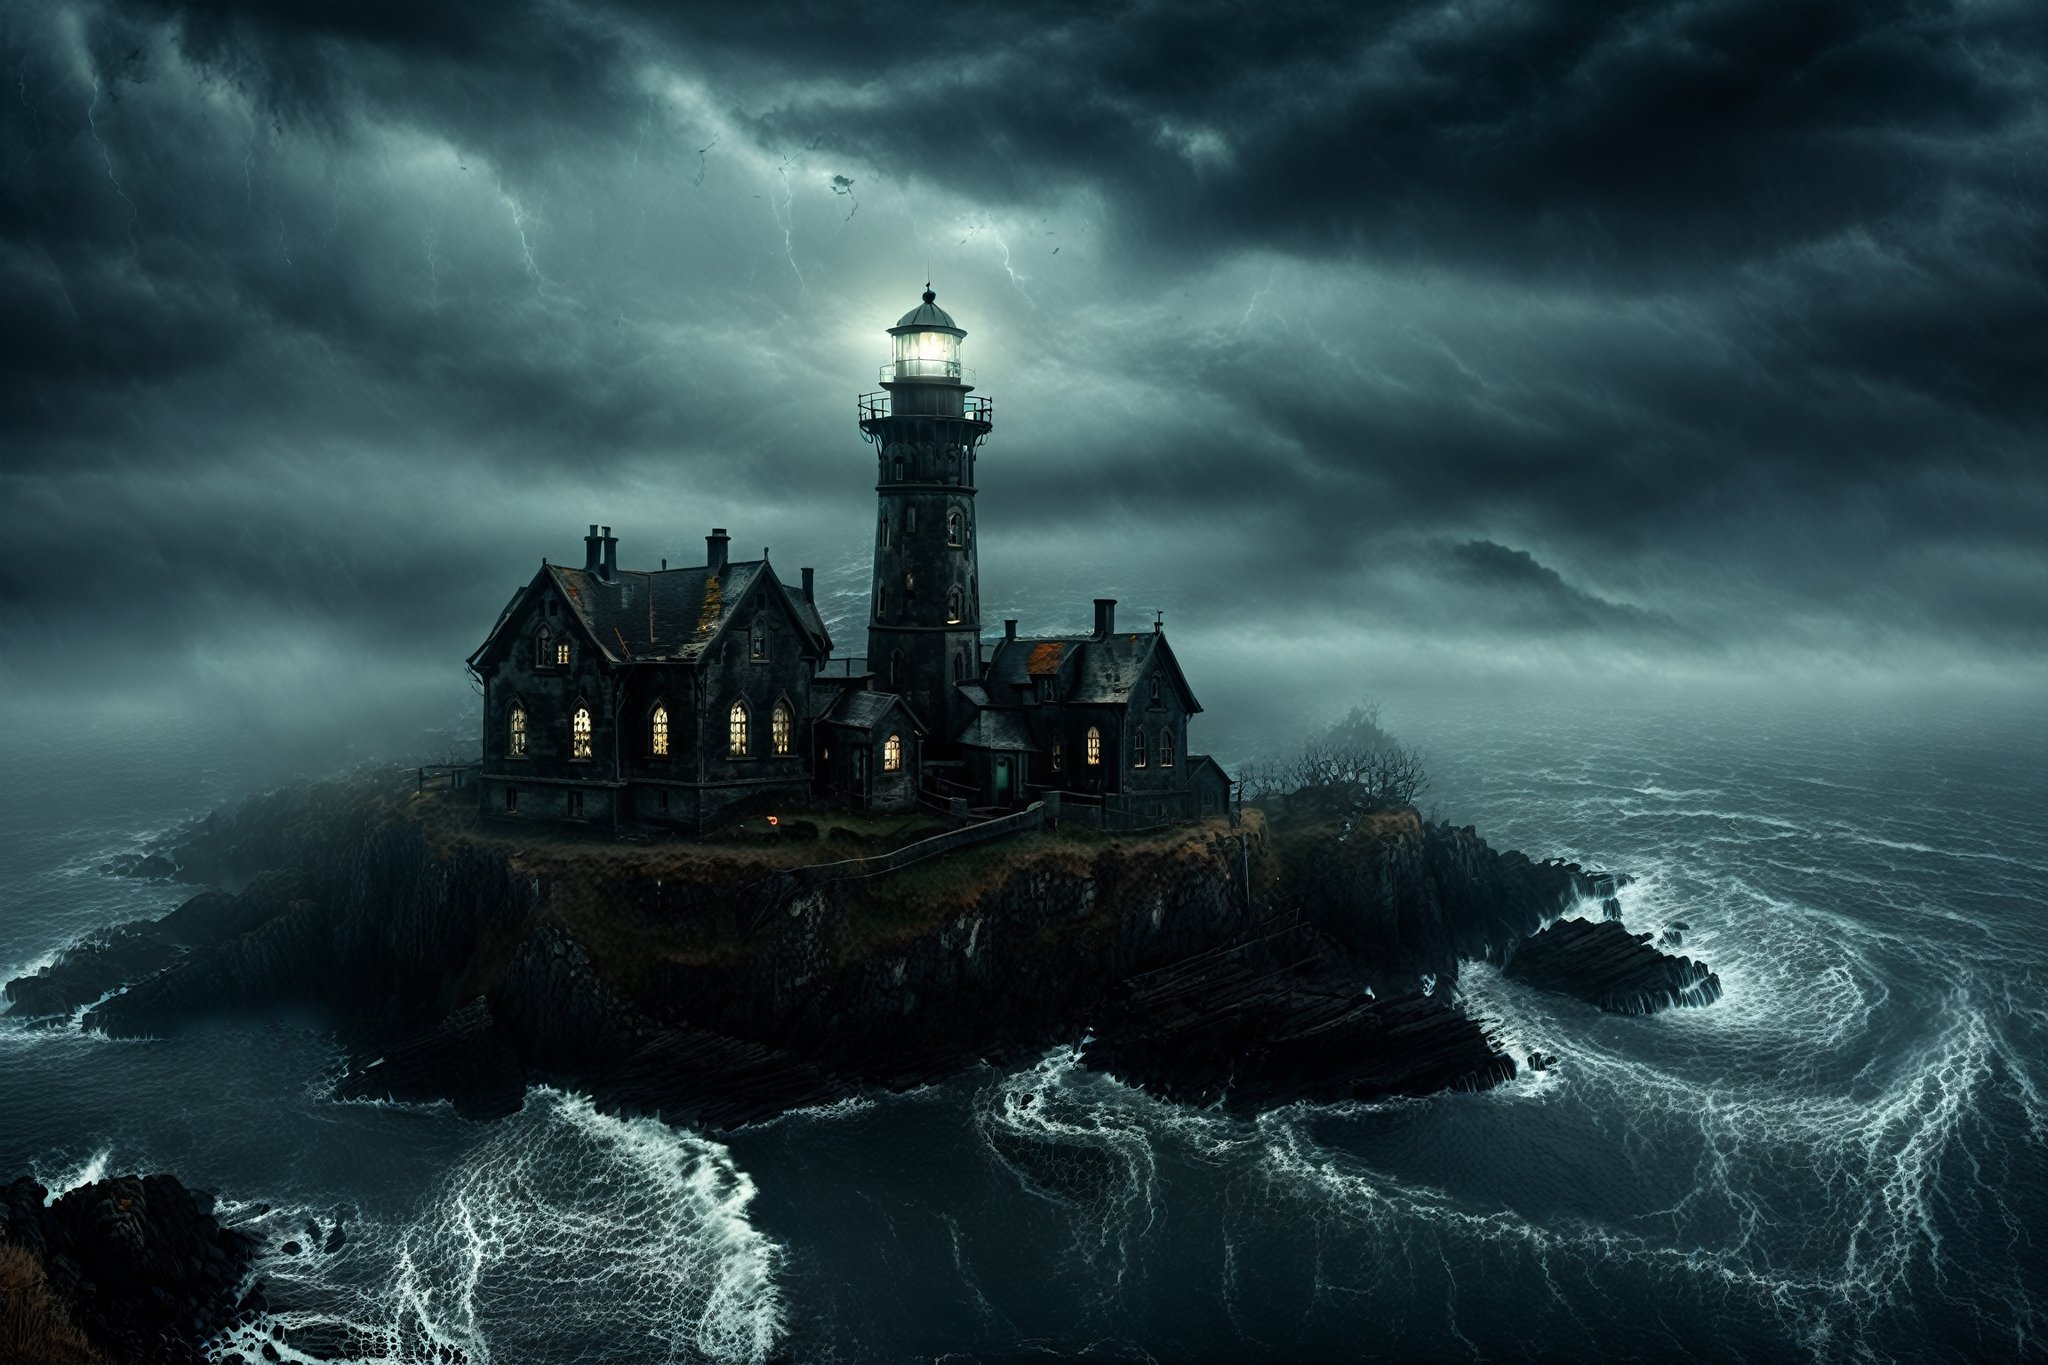 masterpeace, best quality, extremely detailed, 4k, scary setting, fog, haunted, horror, dark scenery, dimly lit, Illustrate a desolate and stormy coastline with a haunted lighthouse that guides lost souls to their doom, its beacon shining with an eerie spectral light, detailmaster2, HellAI, DonMn1ghtm4reXL